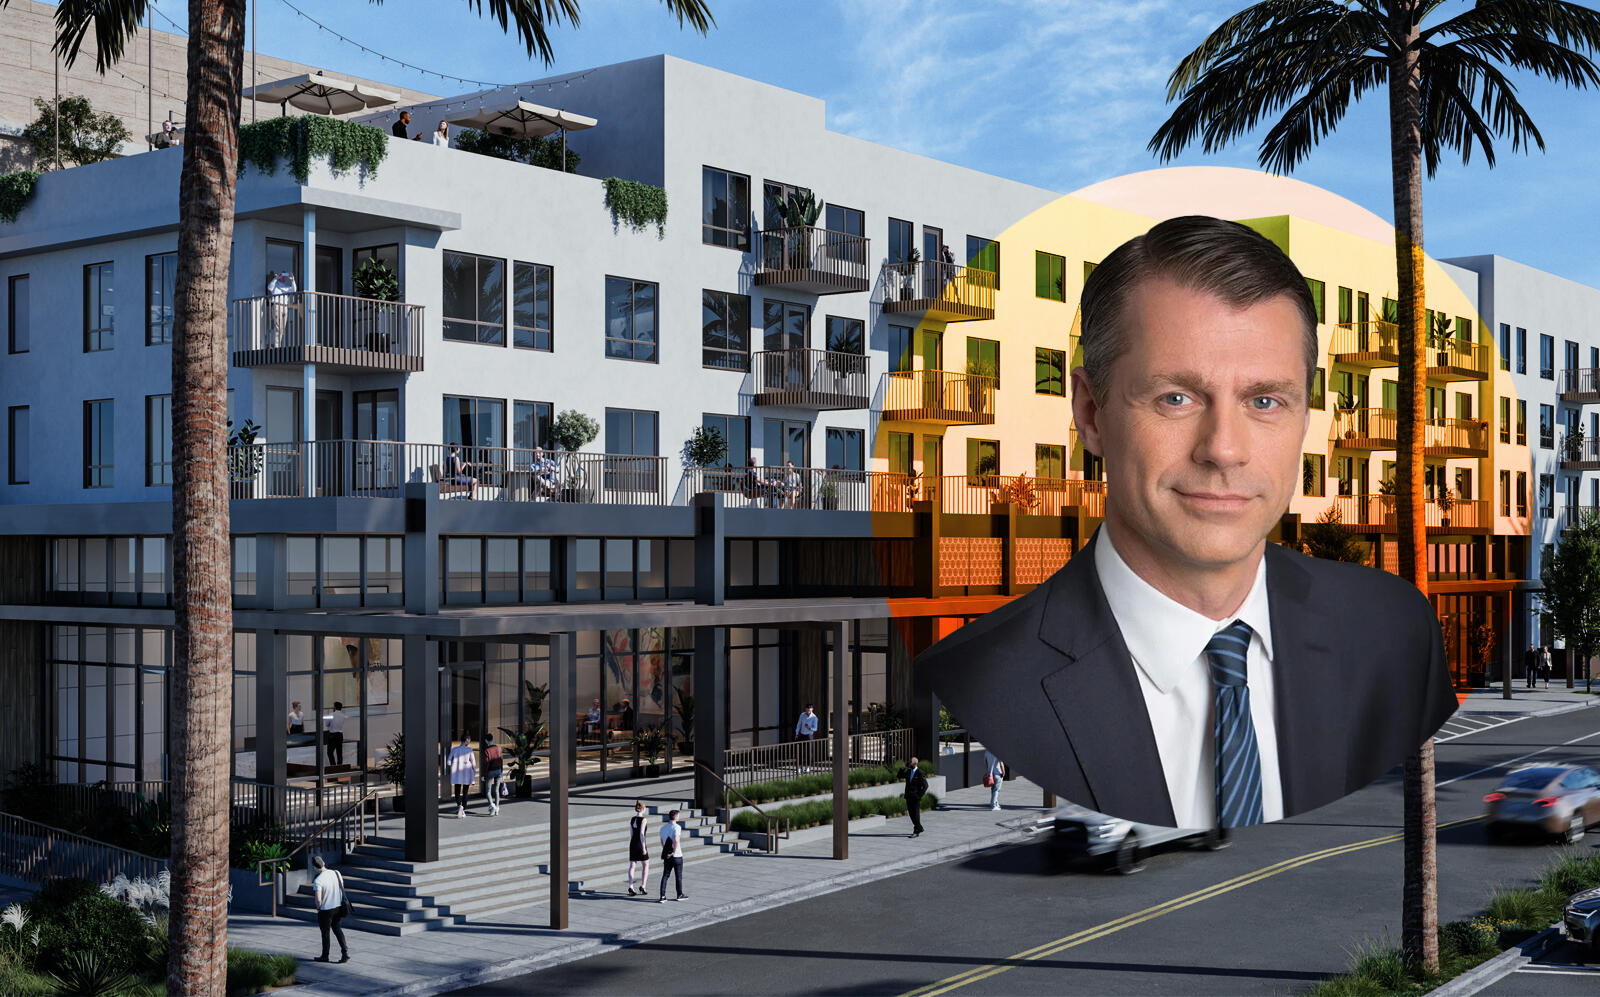 Renderings of the project and Brookfield Properties Managing Partner and CEO Brian Kingston (Brookfield, Los Angeles Department of Building & Planning)